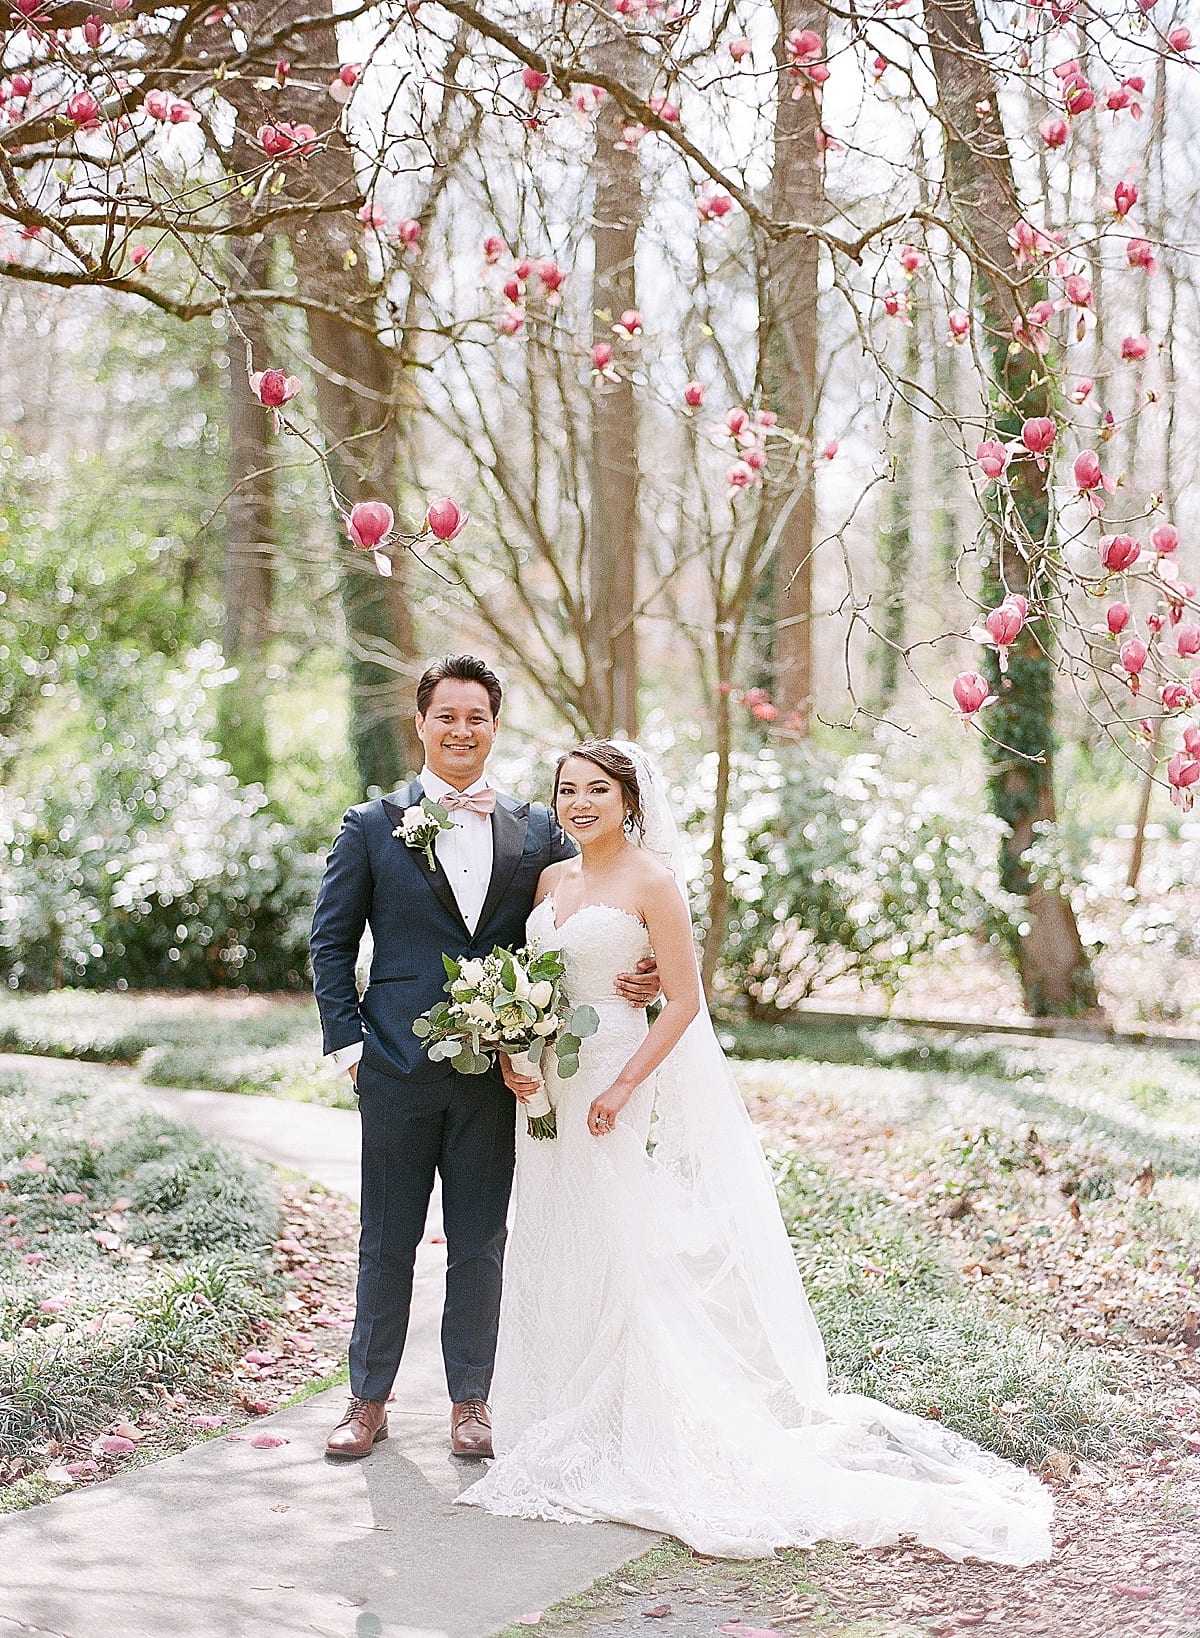 Cator Woolford Gardens Bride and Groom Under Pink Dogwood Tree Photo